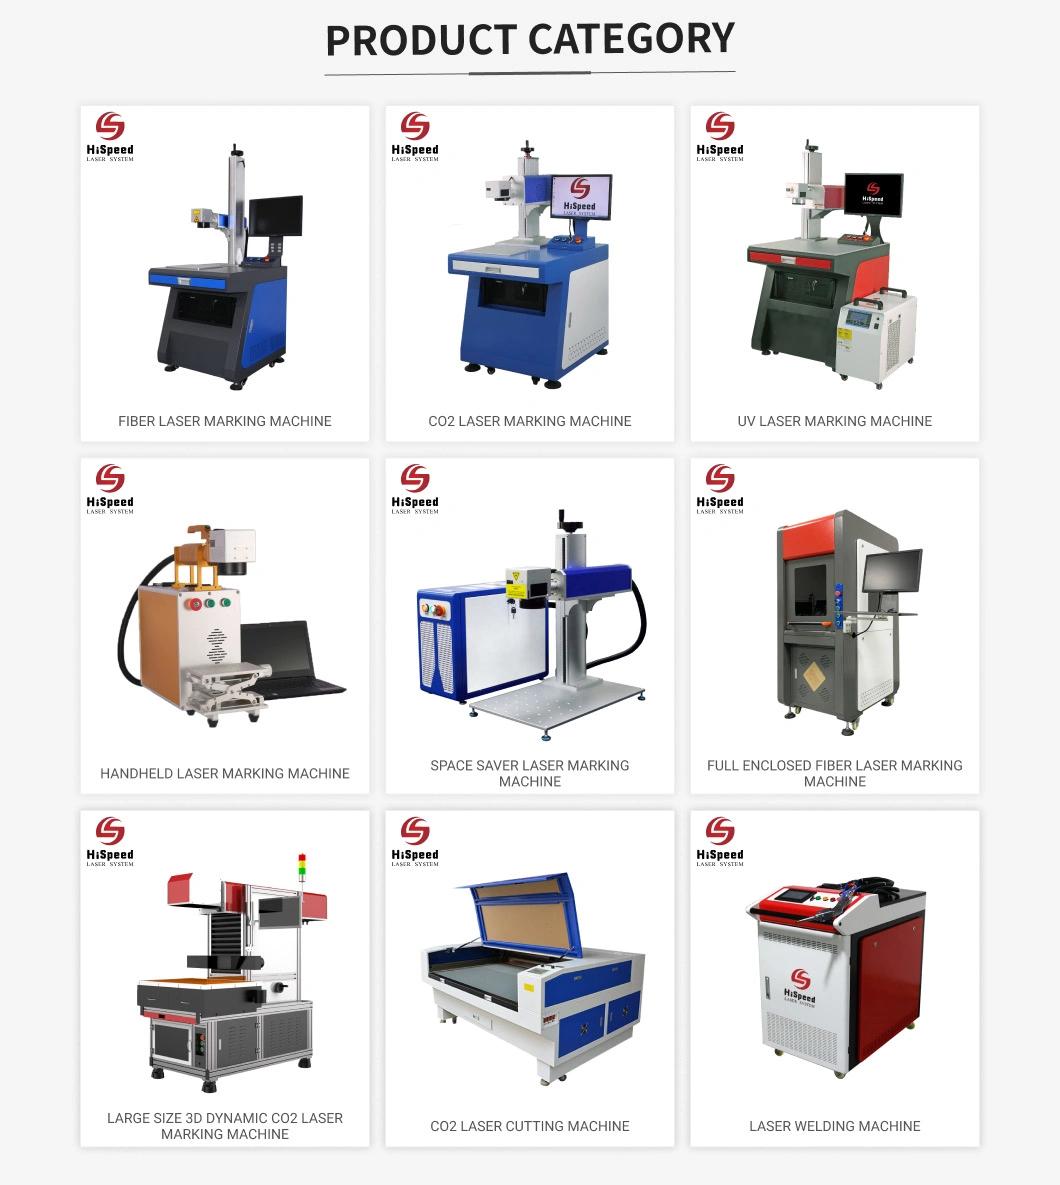 Stable Performance Compact Structure Powerful Function Portable Metal Laser Engraver